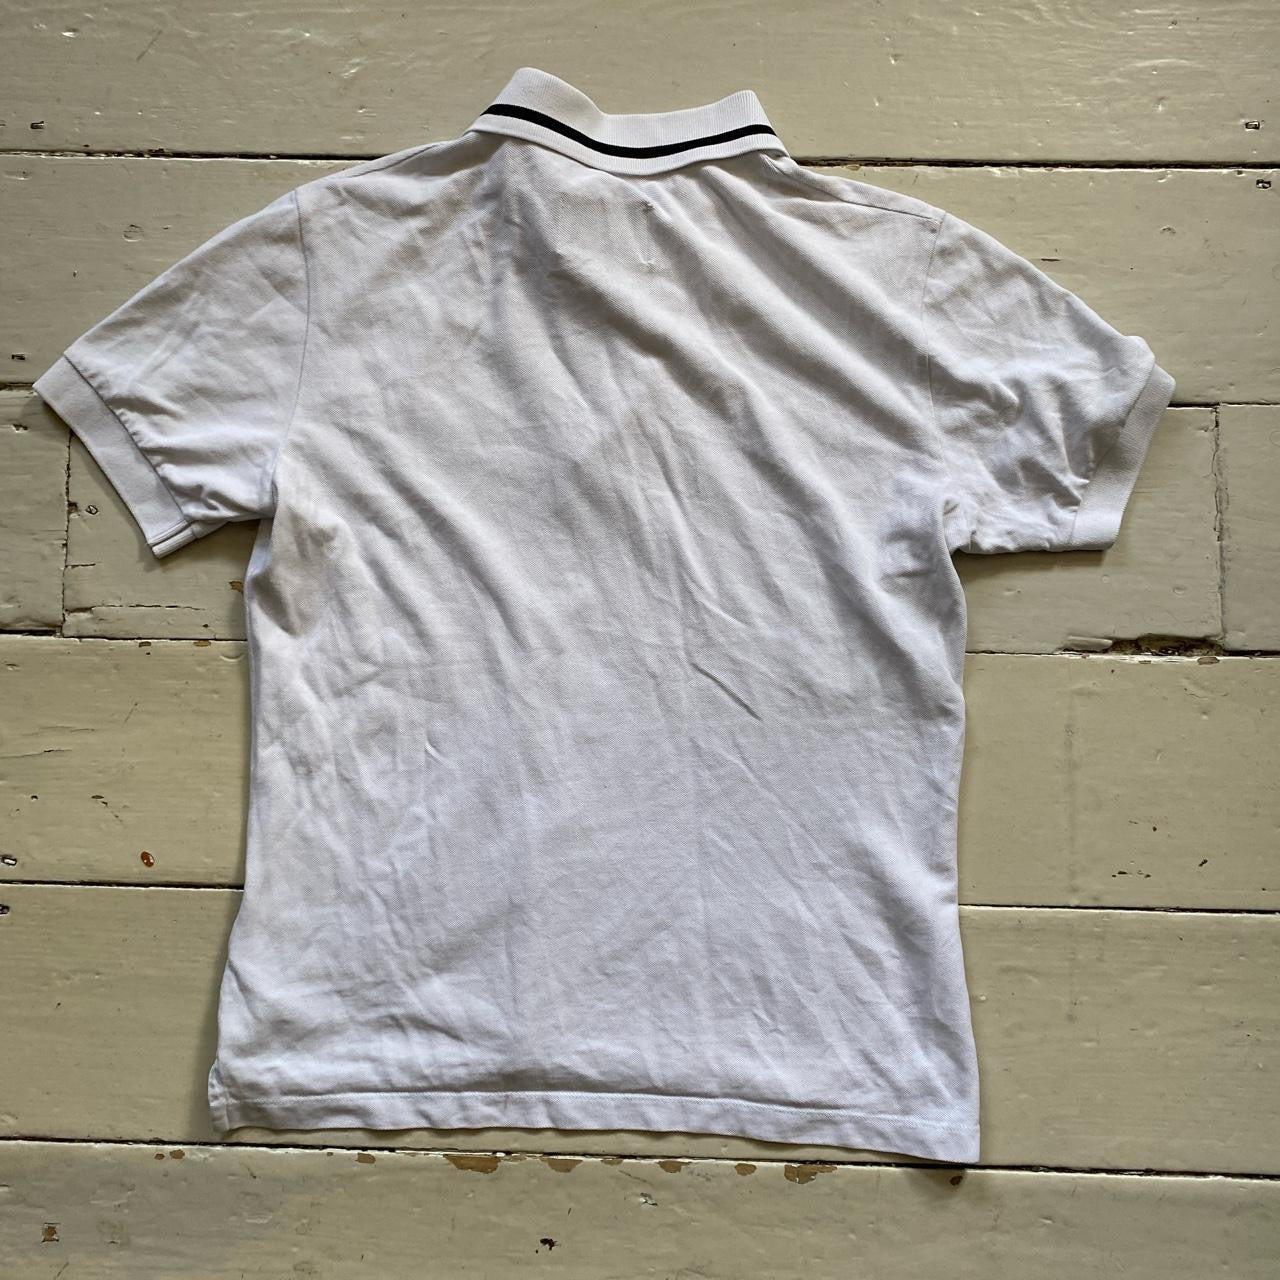 Vivienne Westwood White Polo Shirt (Small)